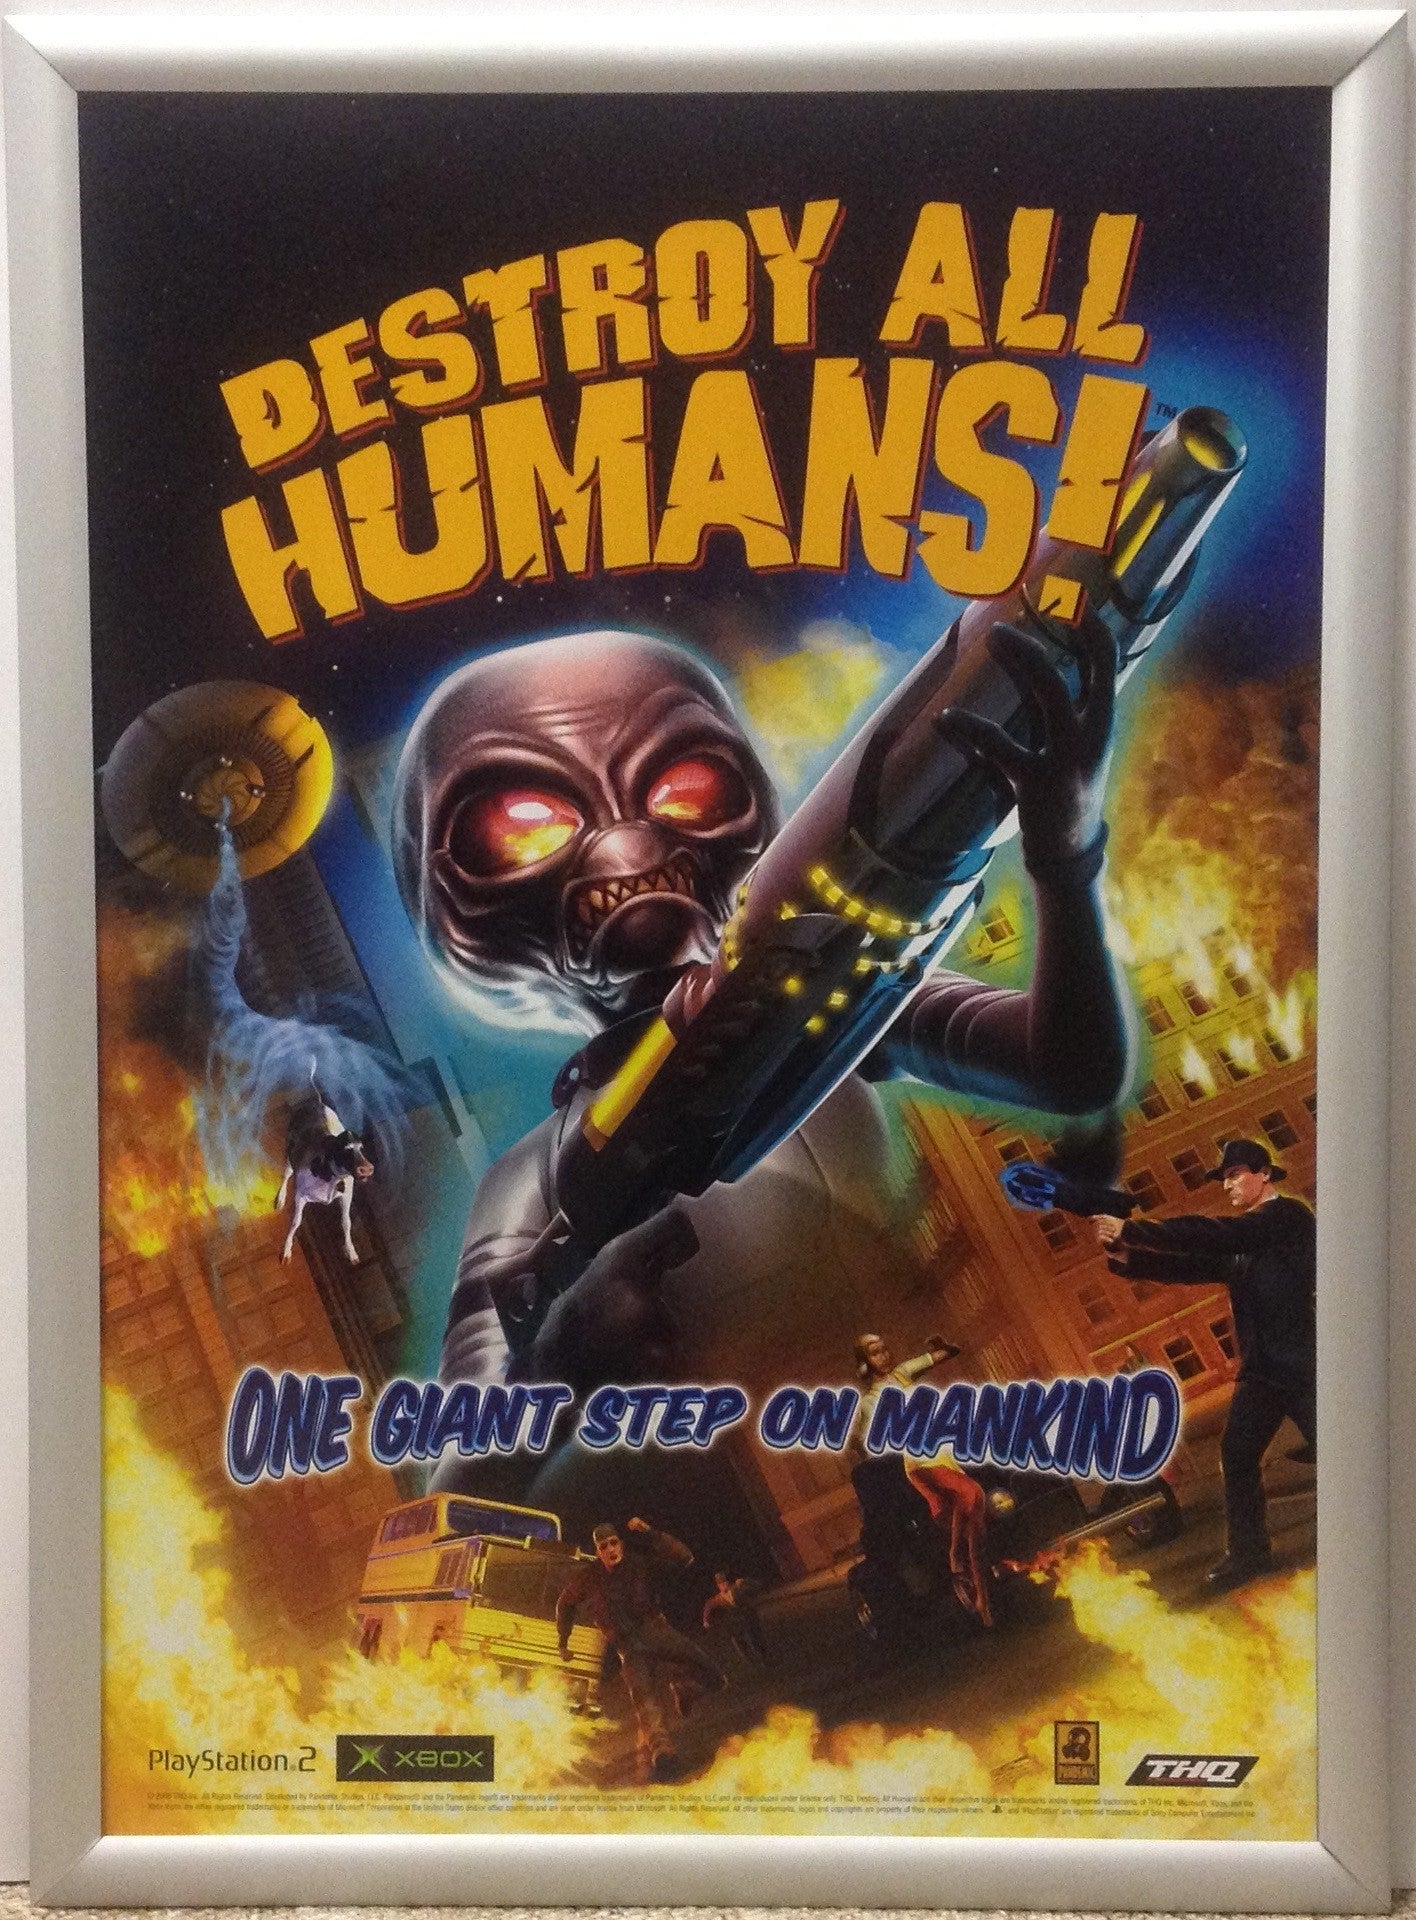 Destroy all Humans (A2) Promotional Poster